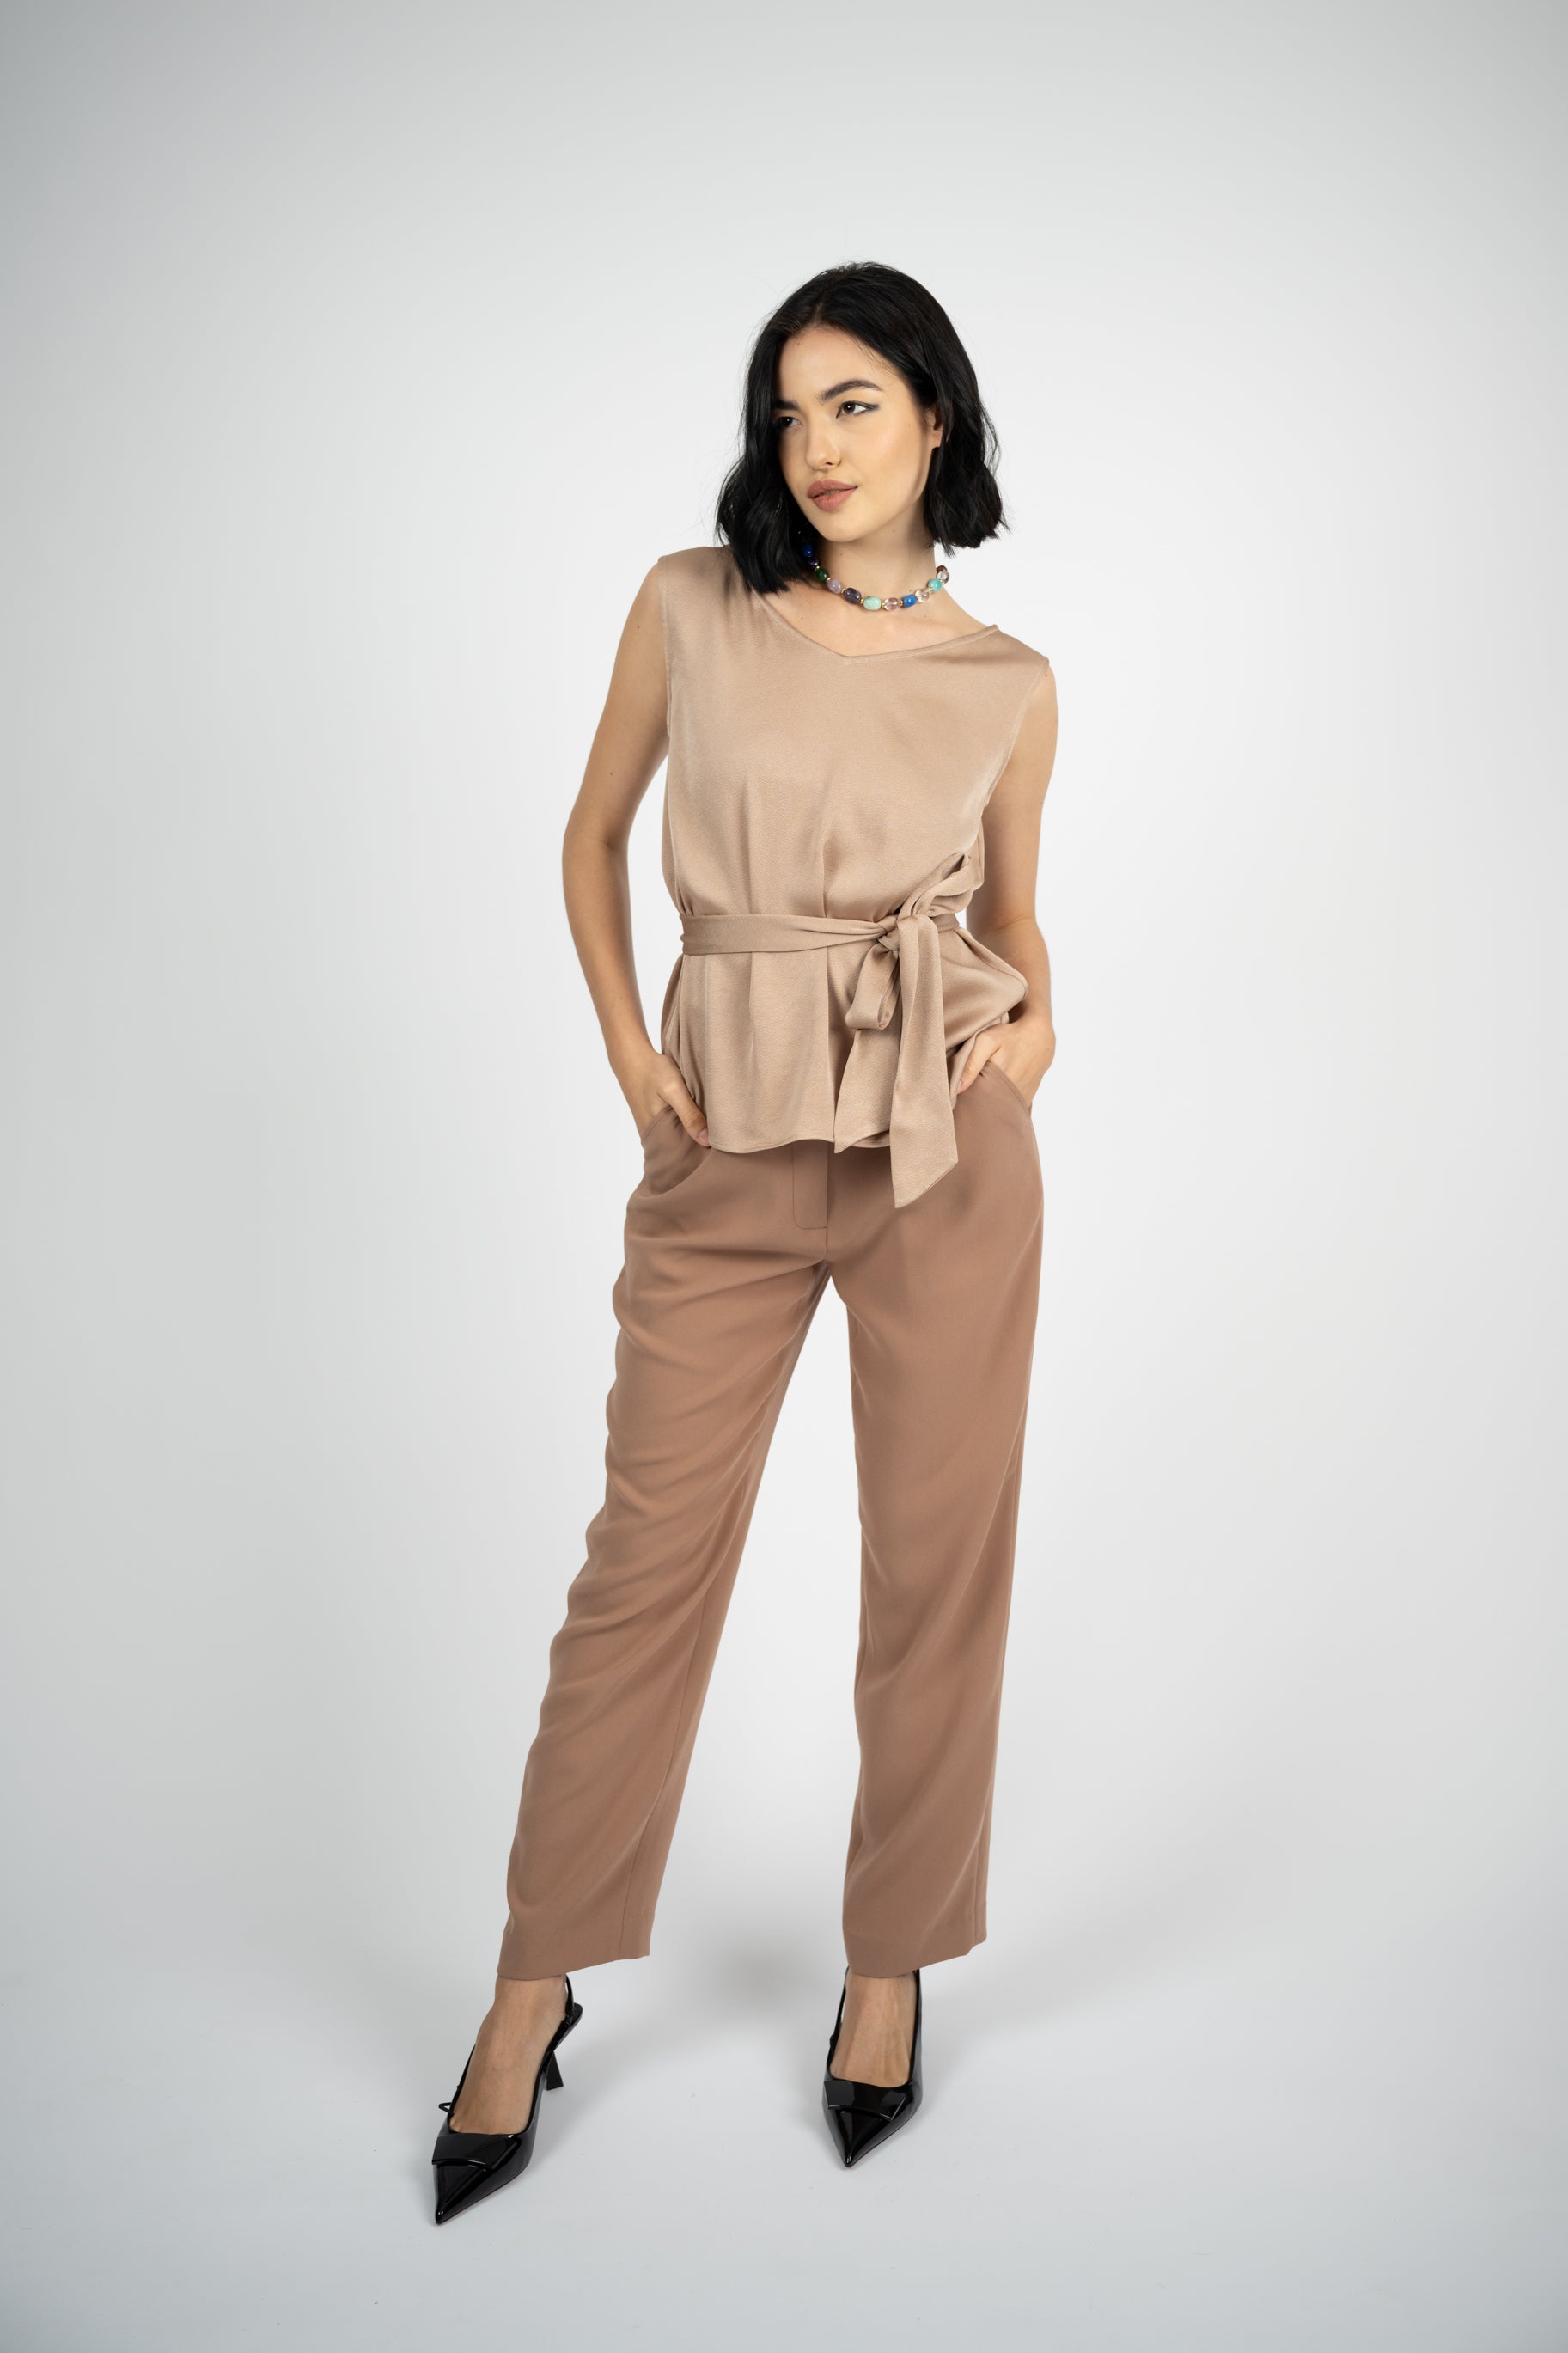 Amelia Acetate Sleeveless Blouse in Natural Color